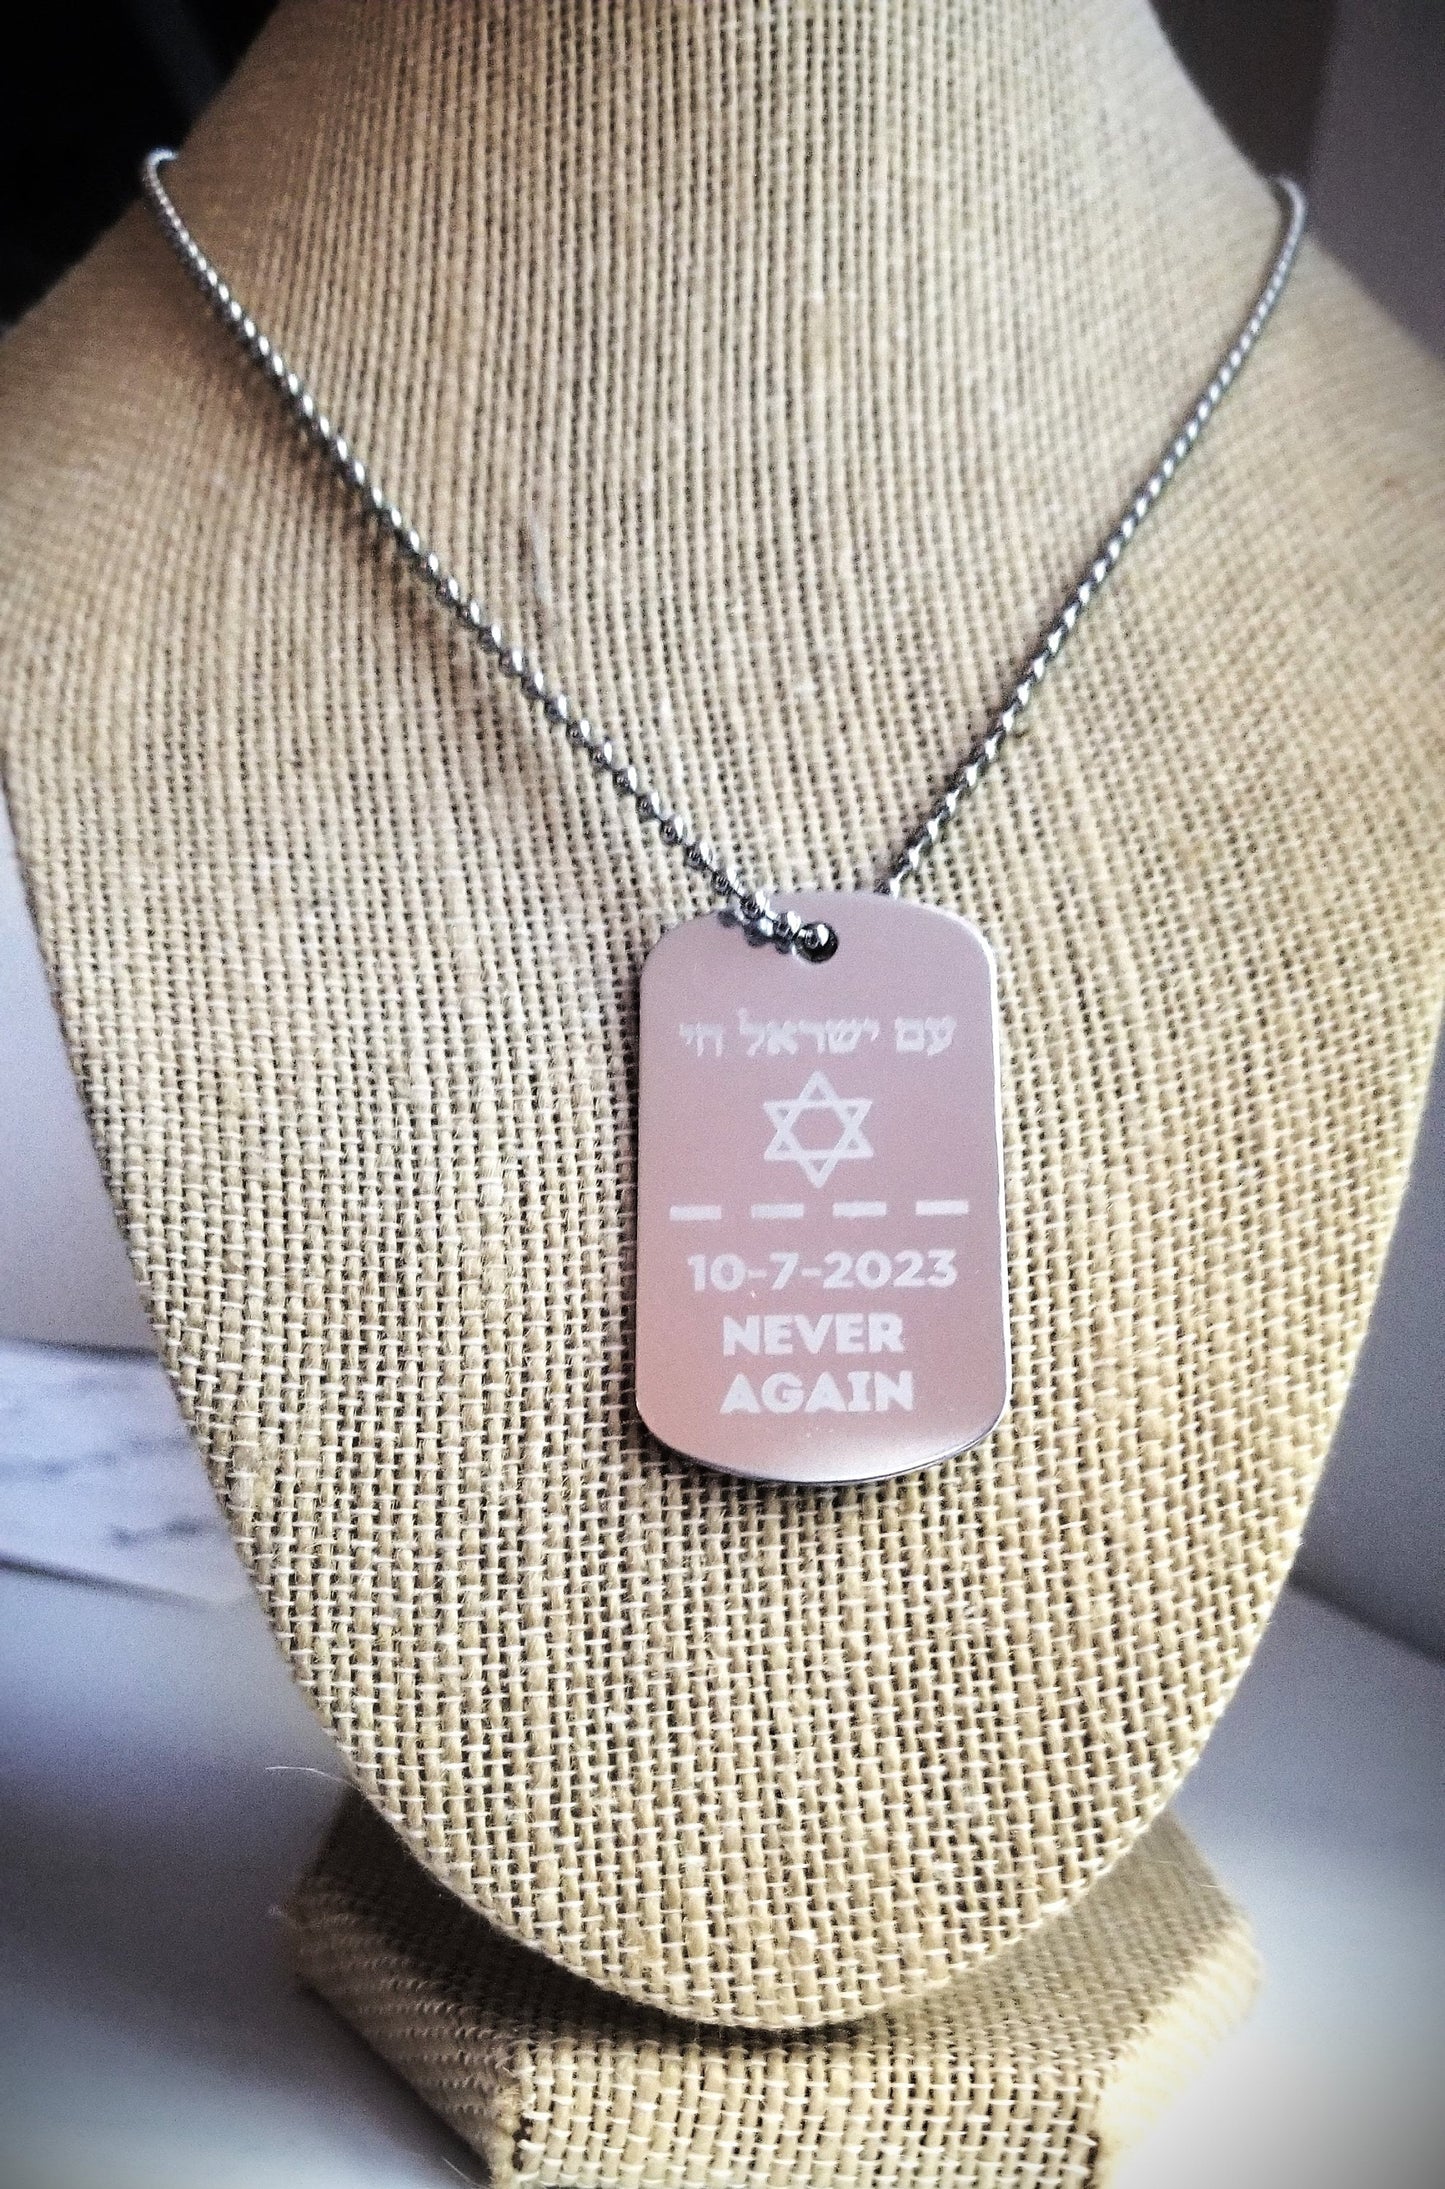 Israeli Military IDF tag, Am Israel Chai army necklace in silver, Hebrew Jewelry, Stand with Israel, Never again Jewish gift, Diskit Disc